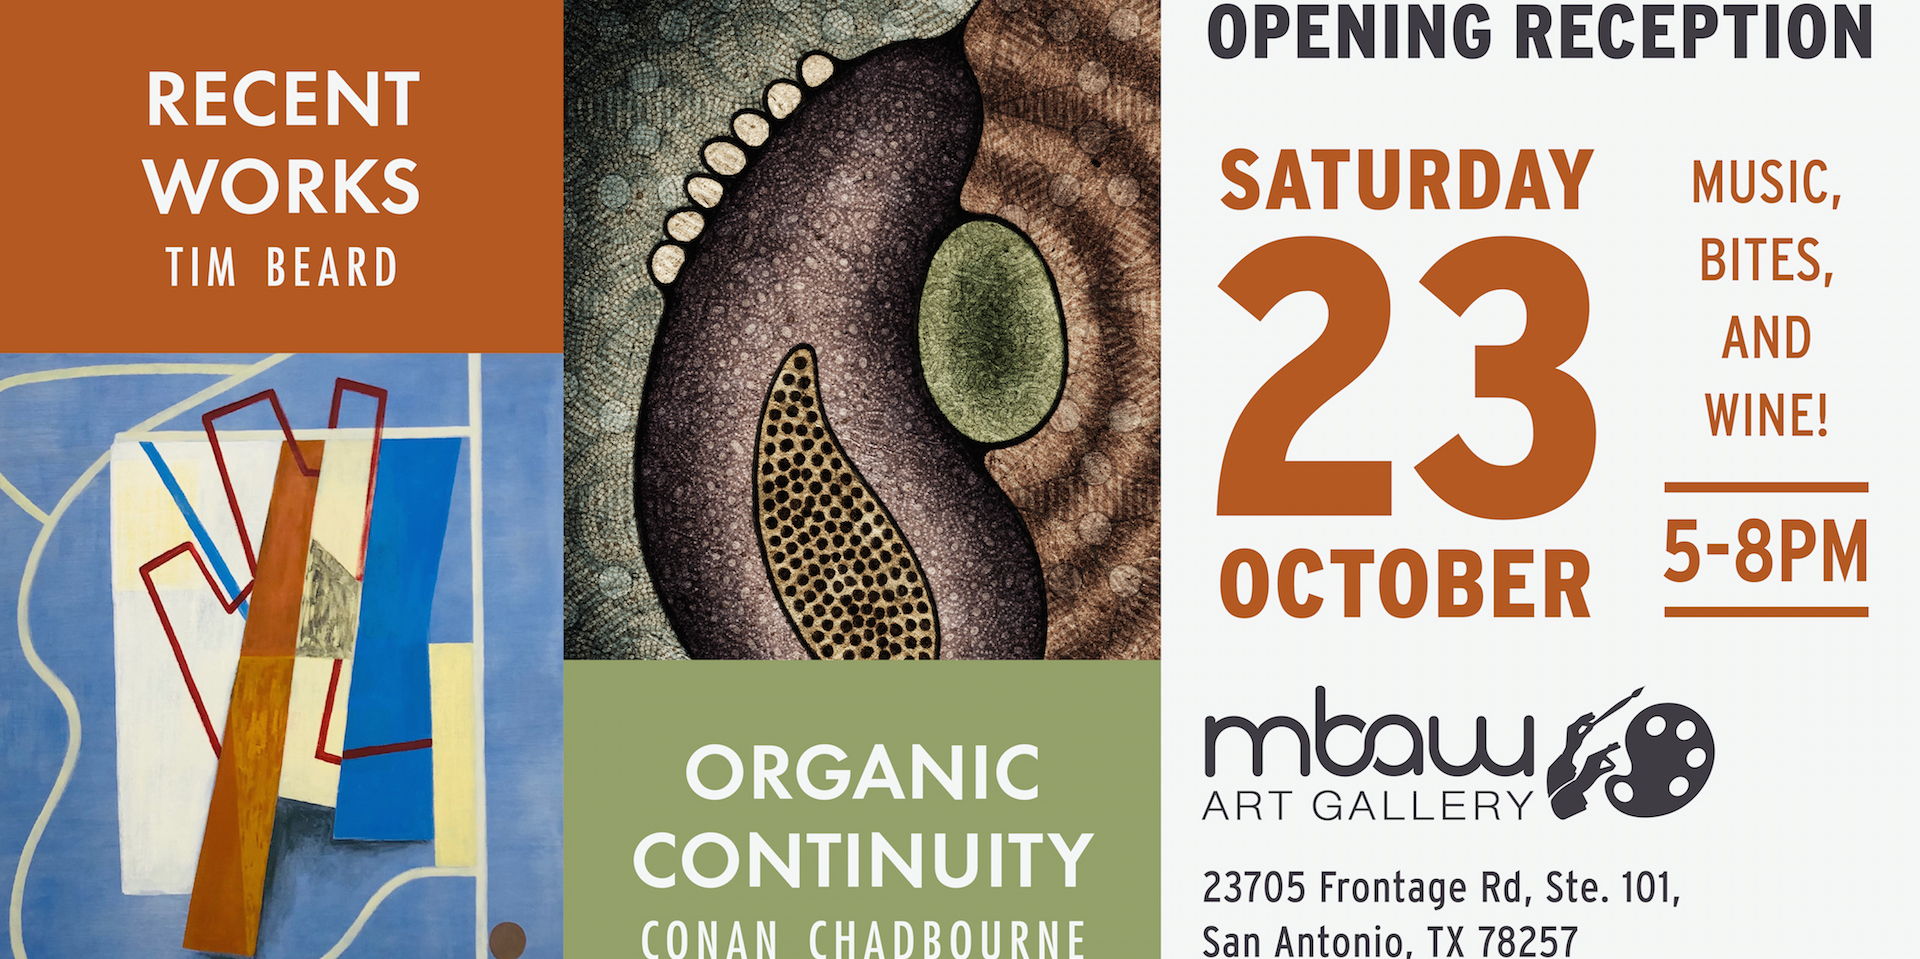 Opening Reception: Recent Works (Tim Beard) & Organic Continuity (Conan Chadbourne) | MBAW Art Gallery promotional image